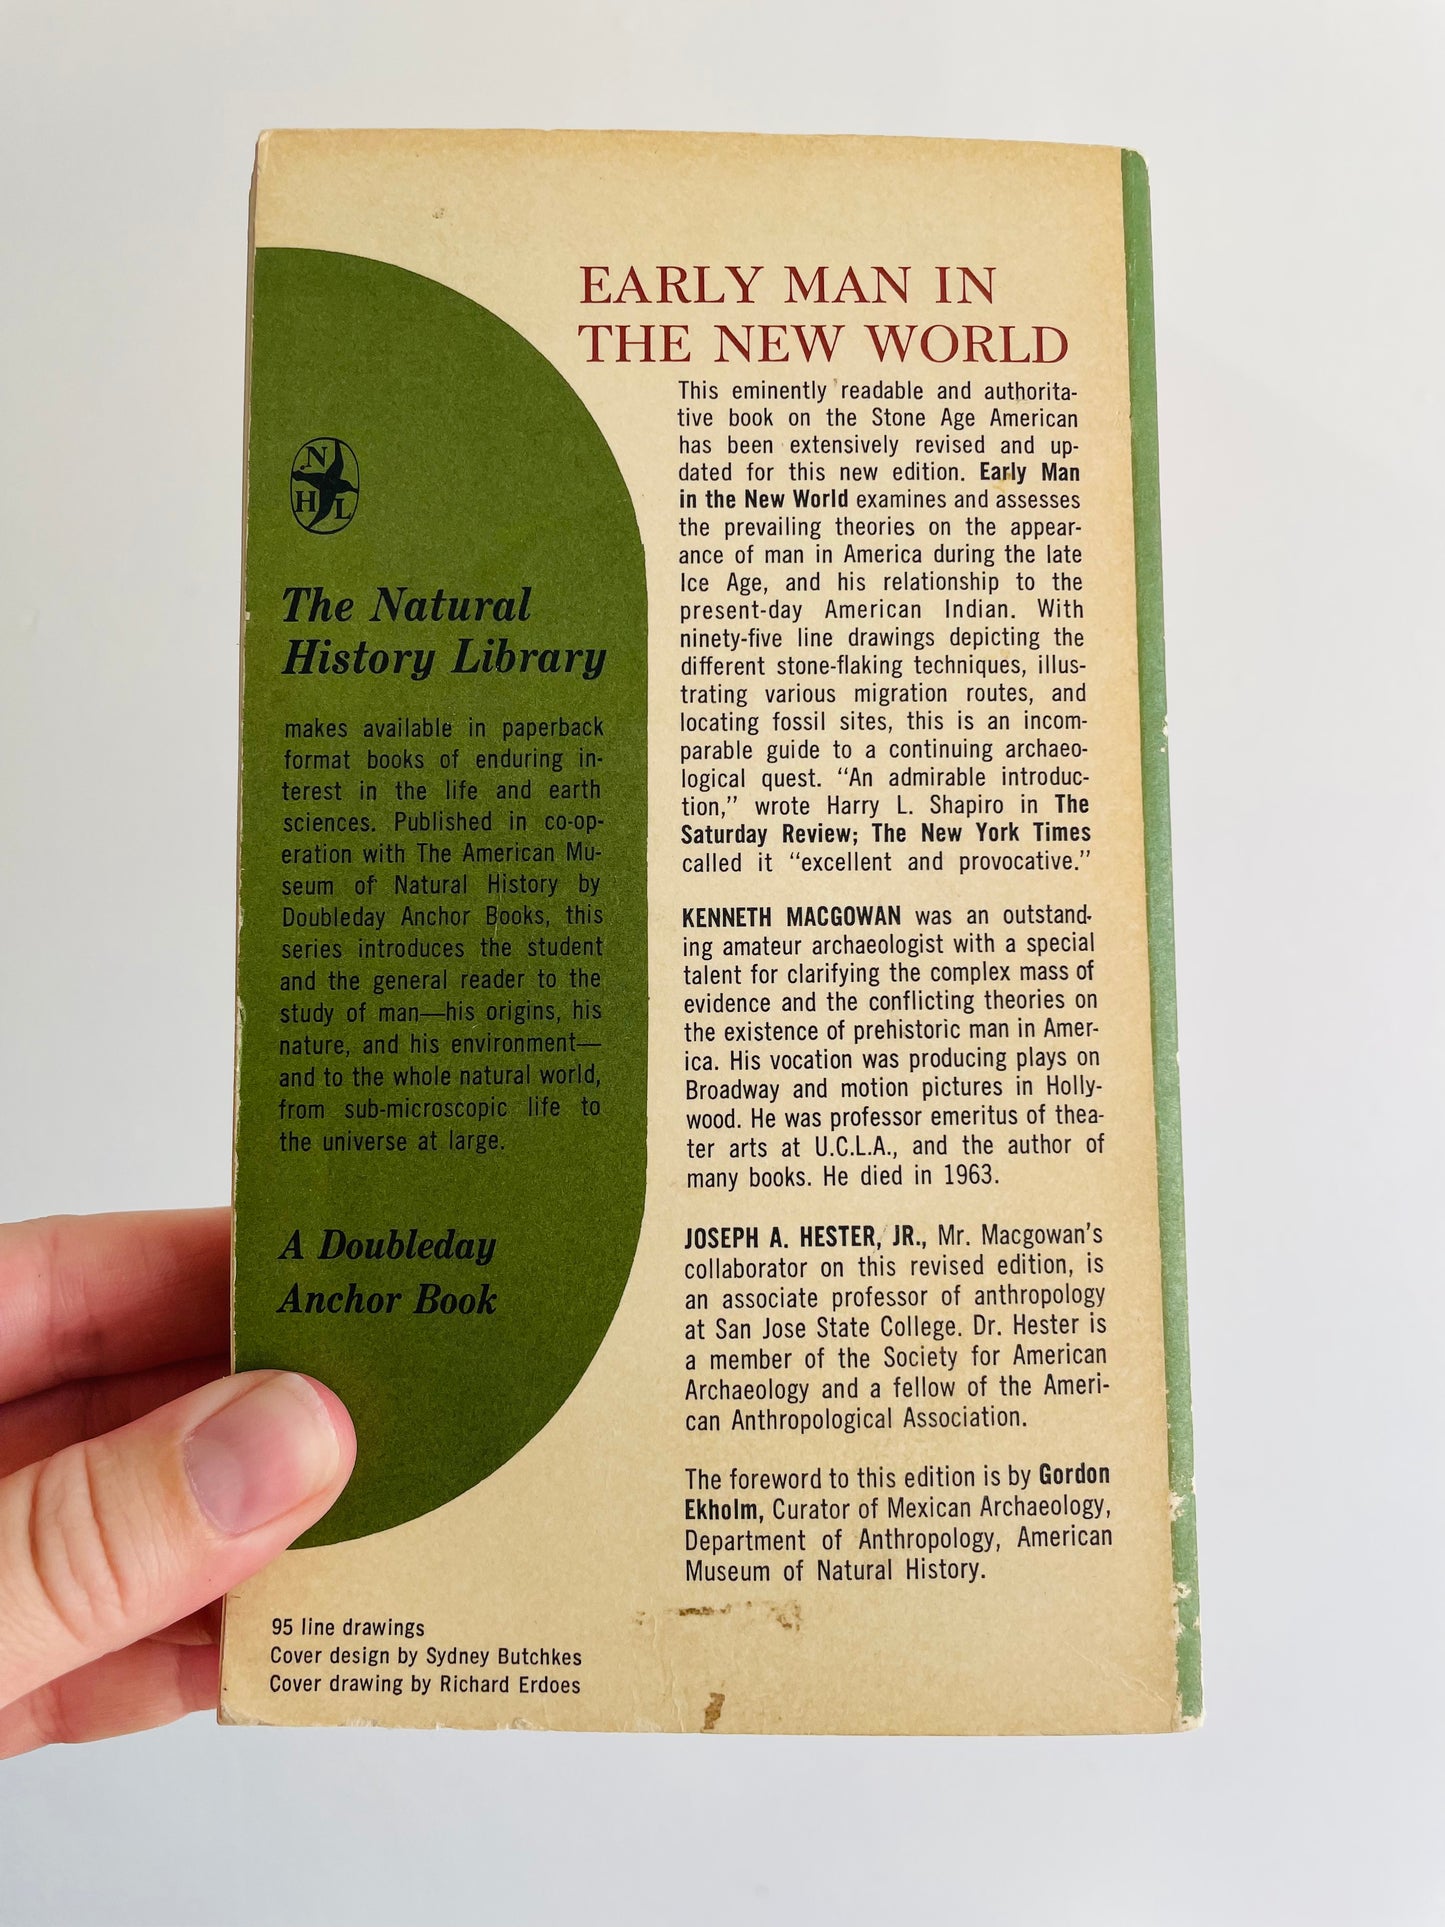 Early Man in the New World Paperback Book by Kenneth Macgowan & Joseph A. Hester Jr.  - The Natural History Library (1962)